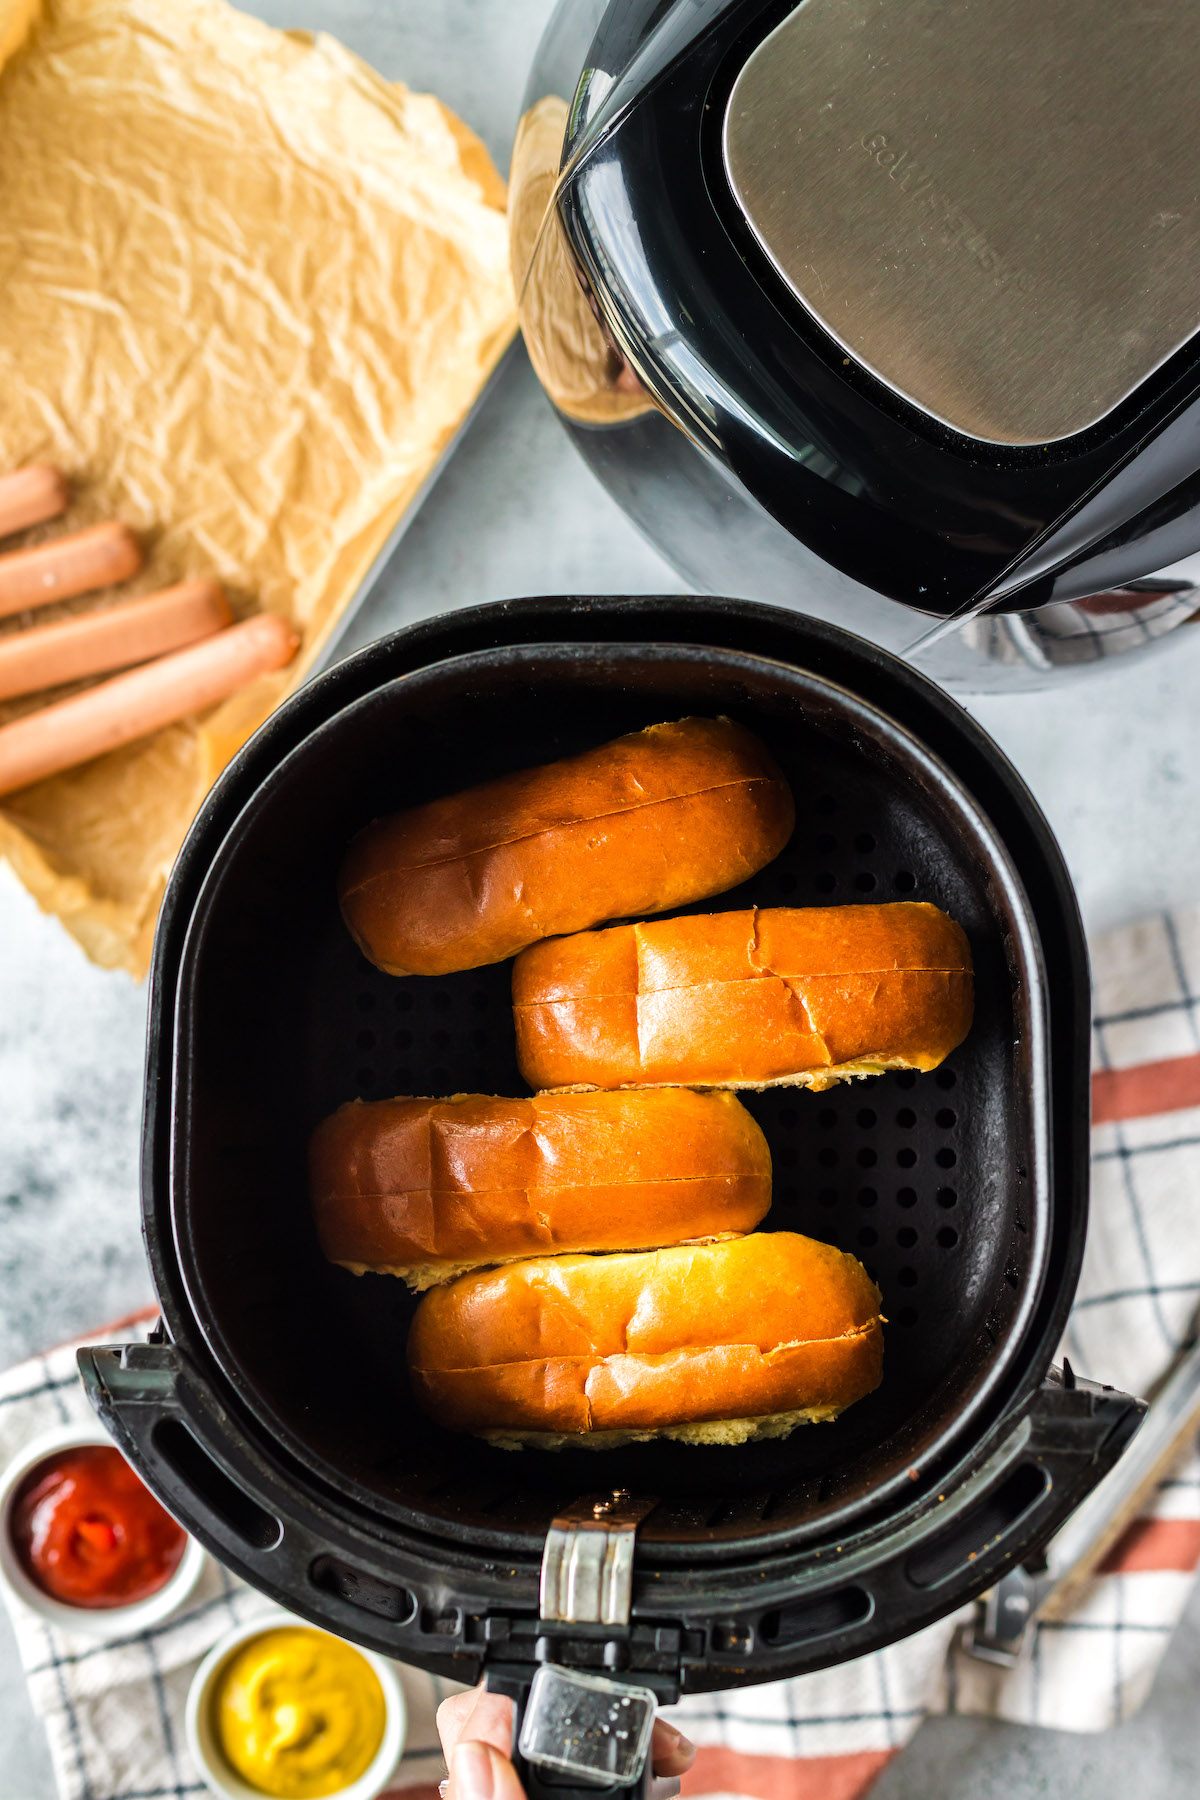 toasting hot dog buns in the air fryer